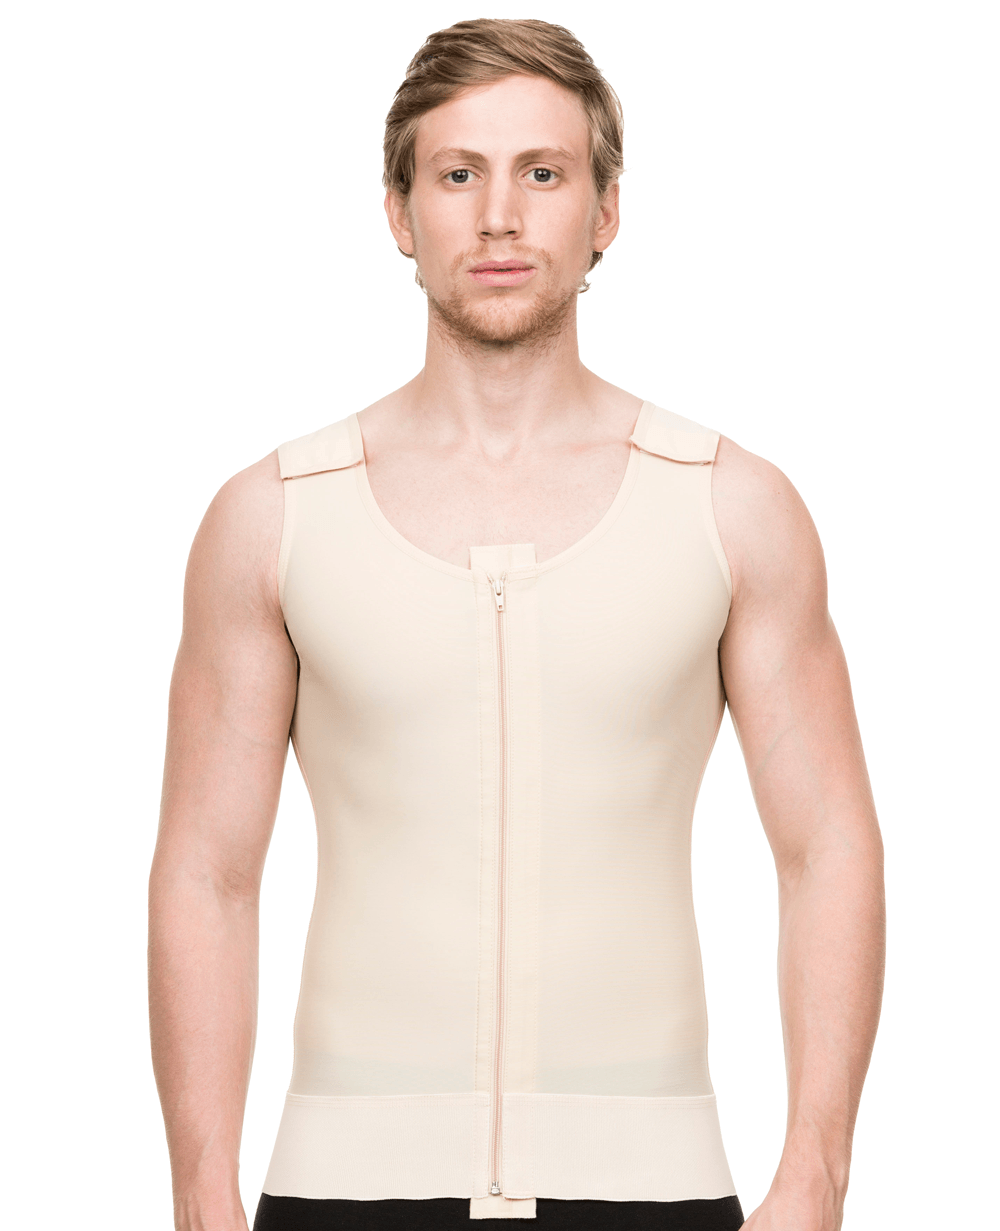 Customized compression garment vest on our 74-year-old patient with a